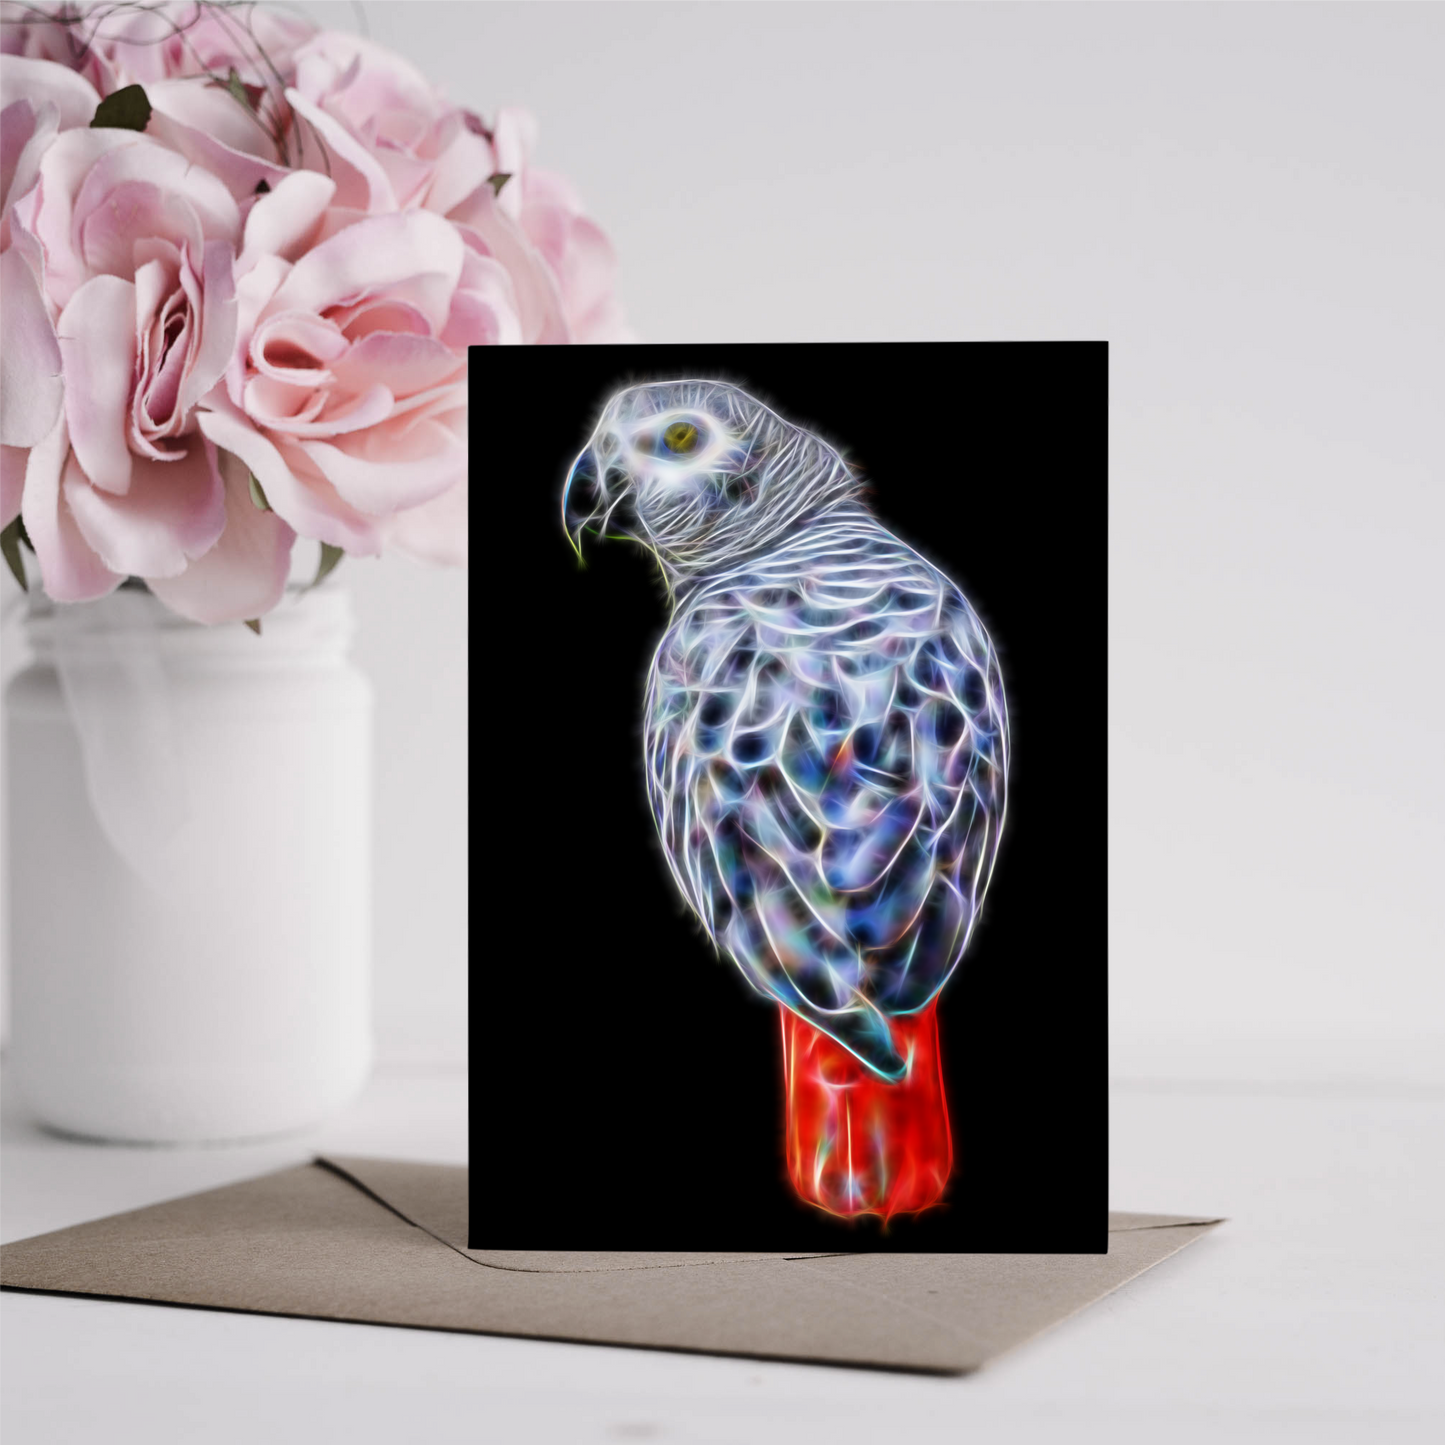 African Grey Parrot Greeting Card (Blank Inside)